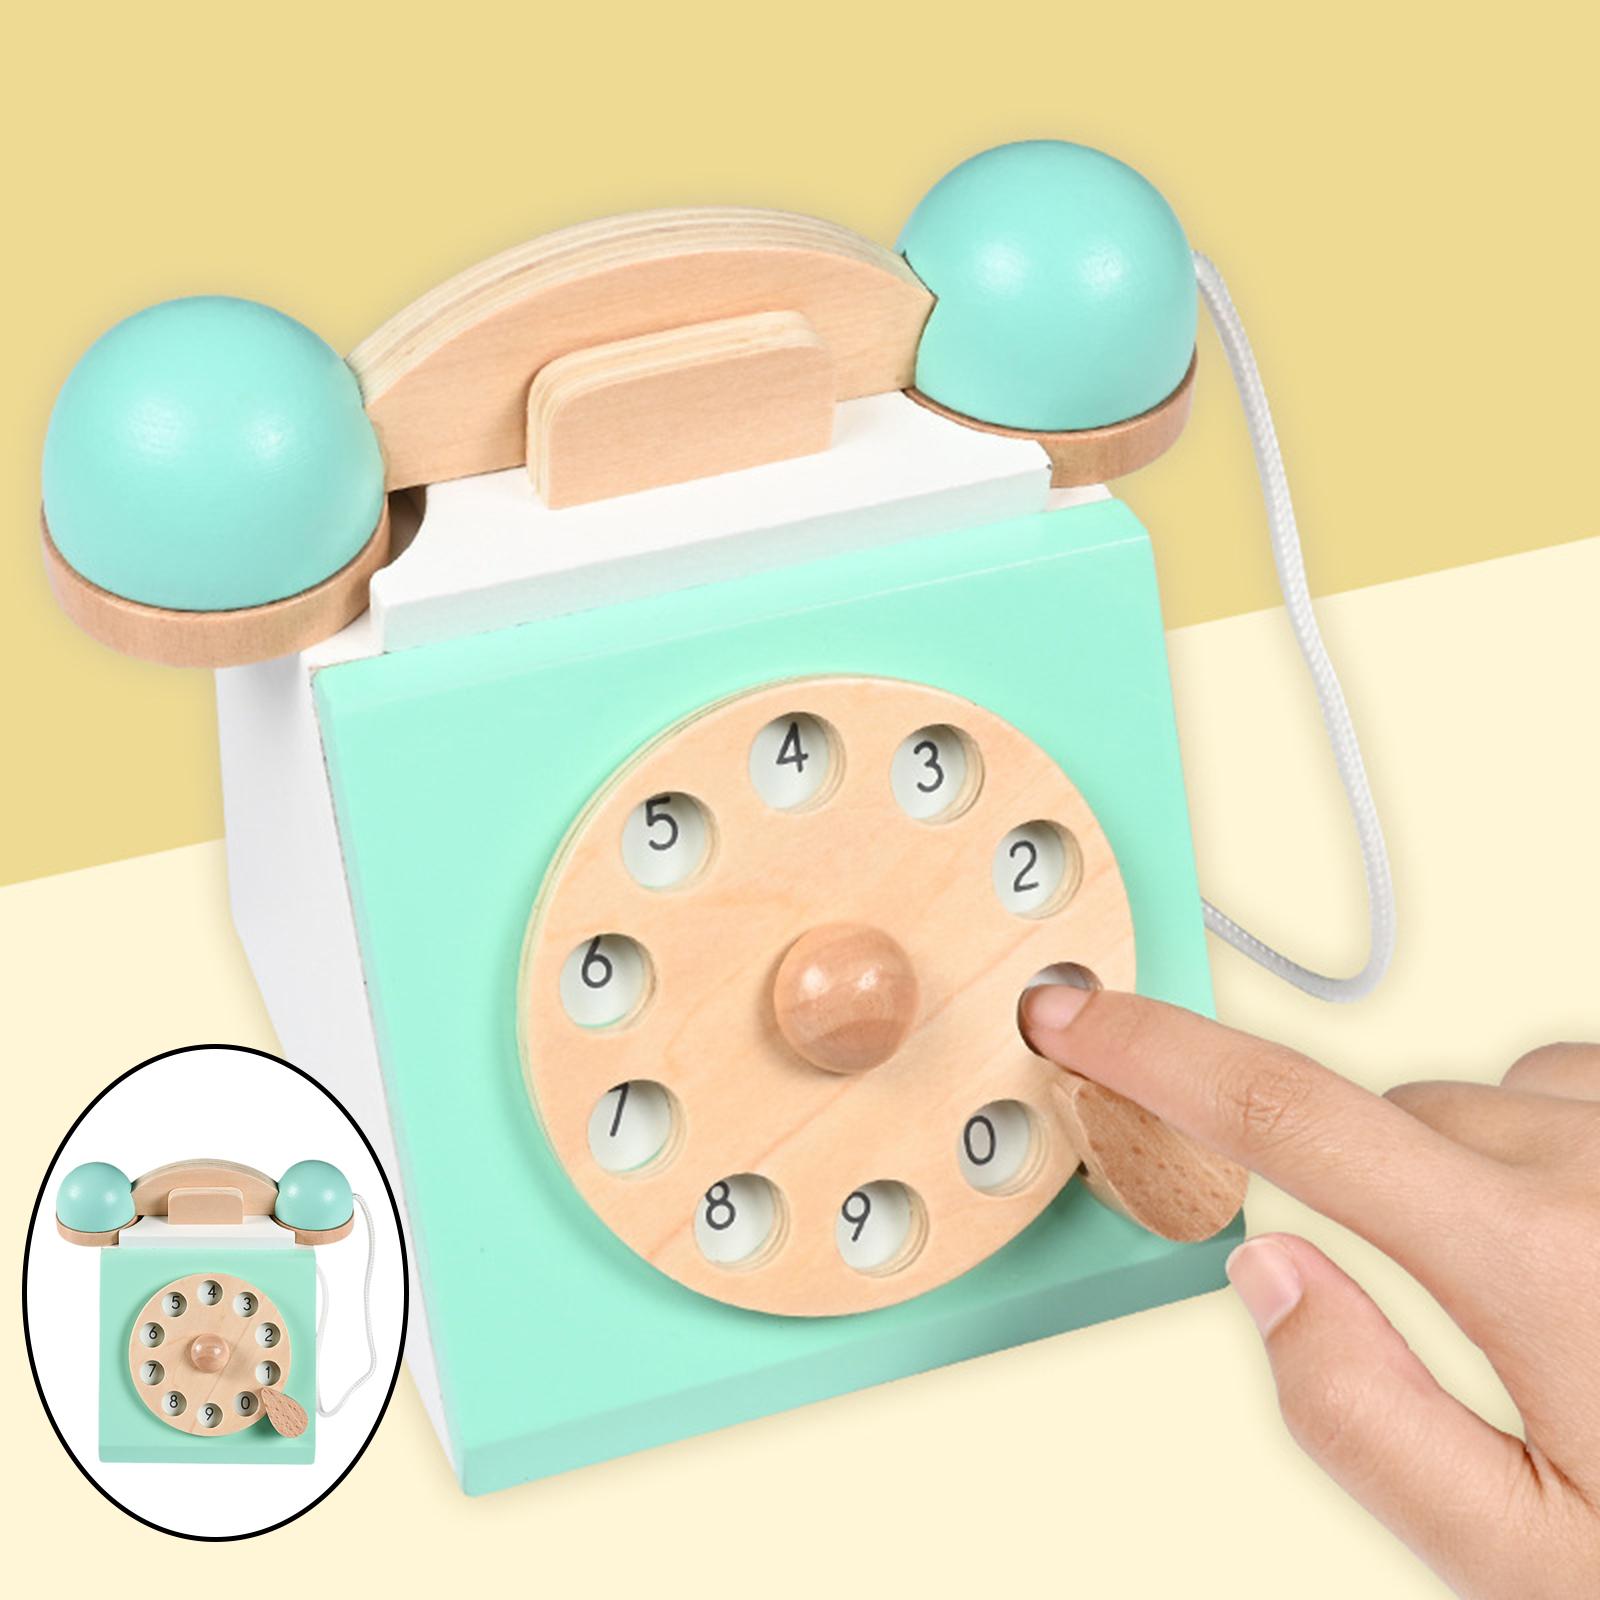 Retro Simulation Phone Playset Wooden Toys Role Play Educational